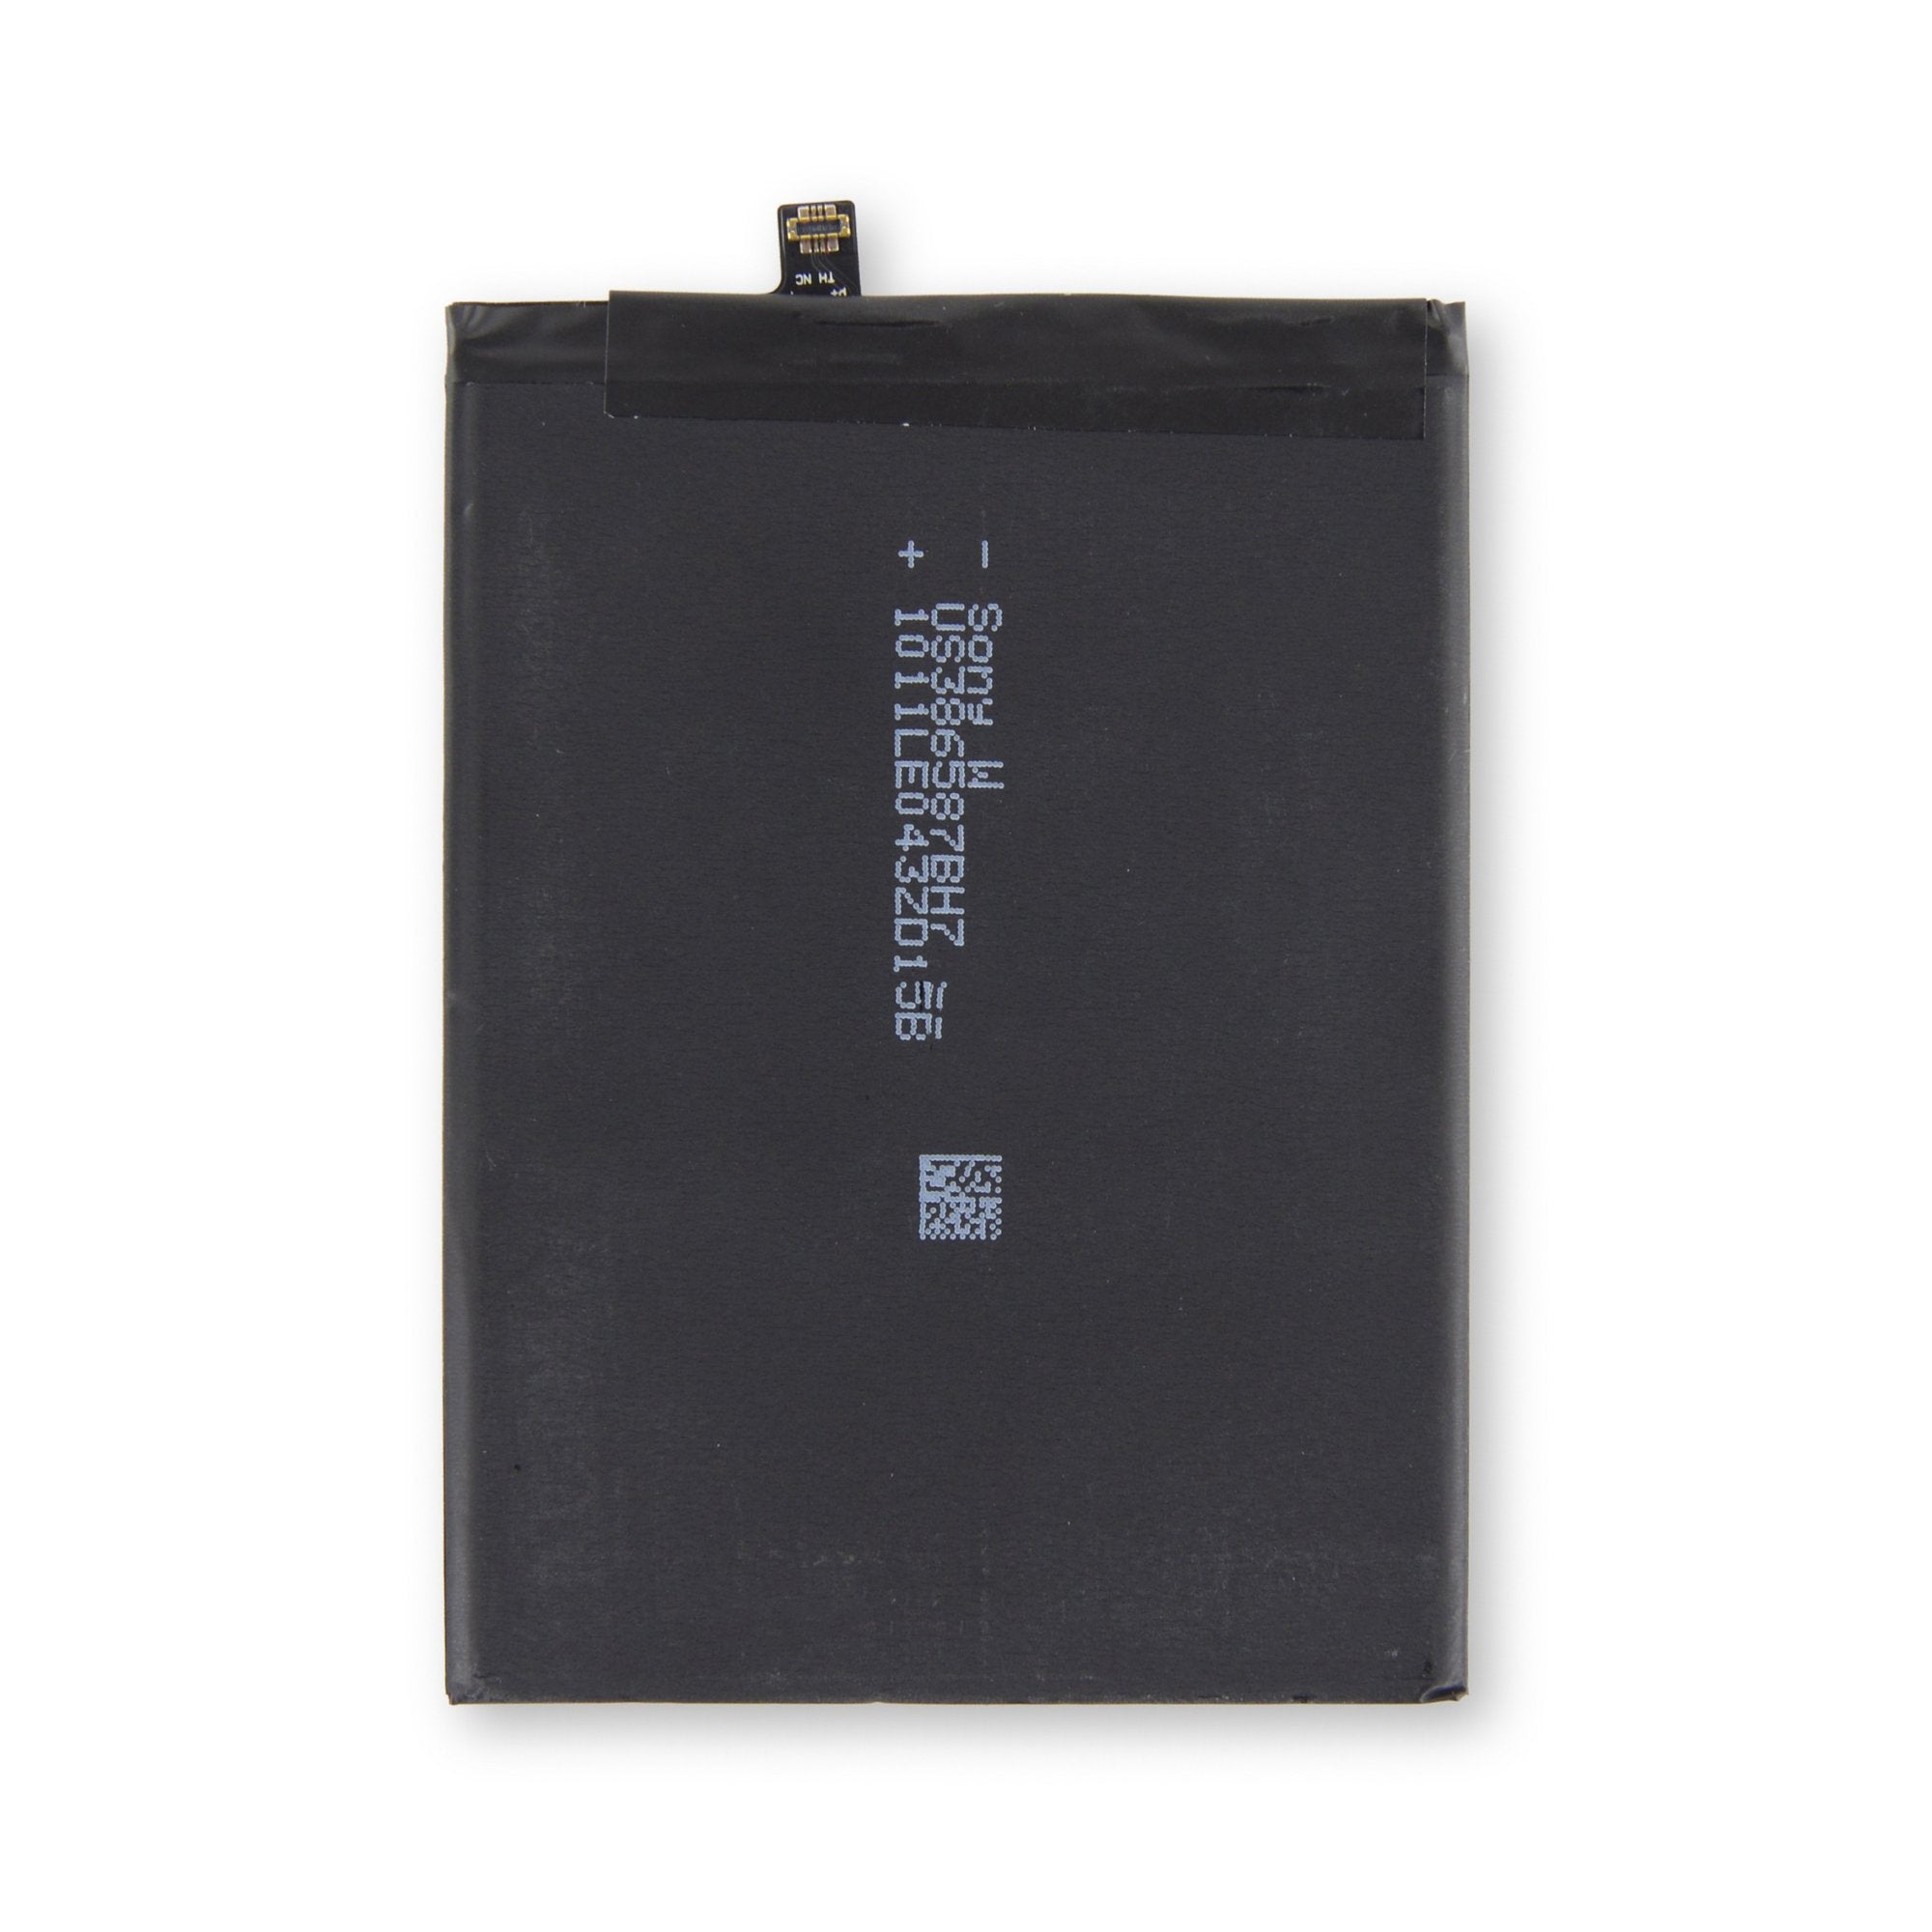 Huawei P10 Plus Battery New Part Only